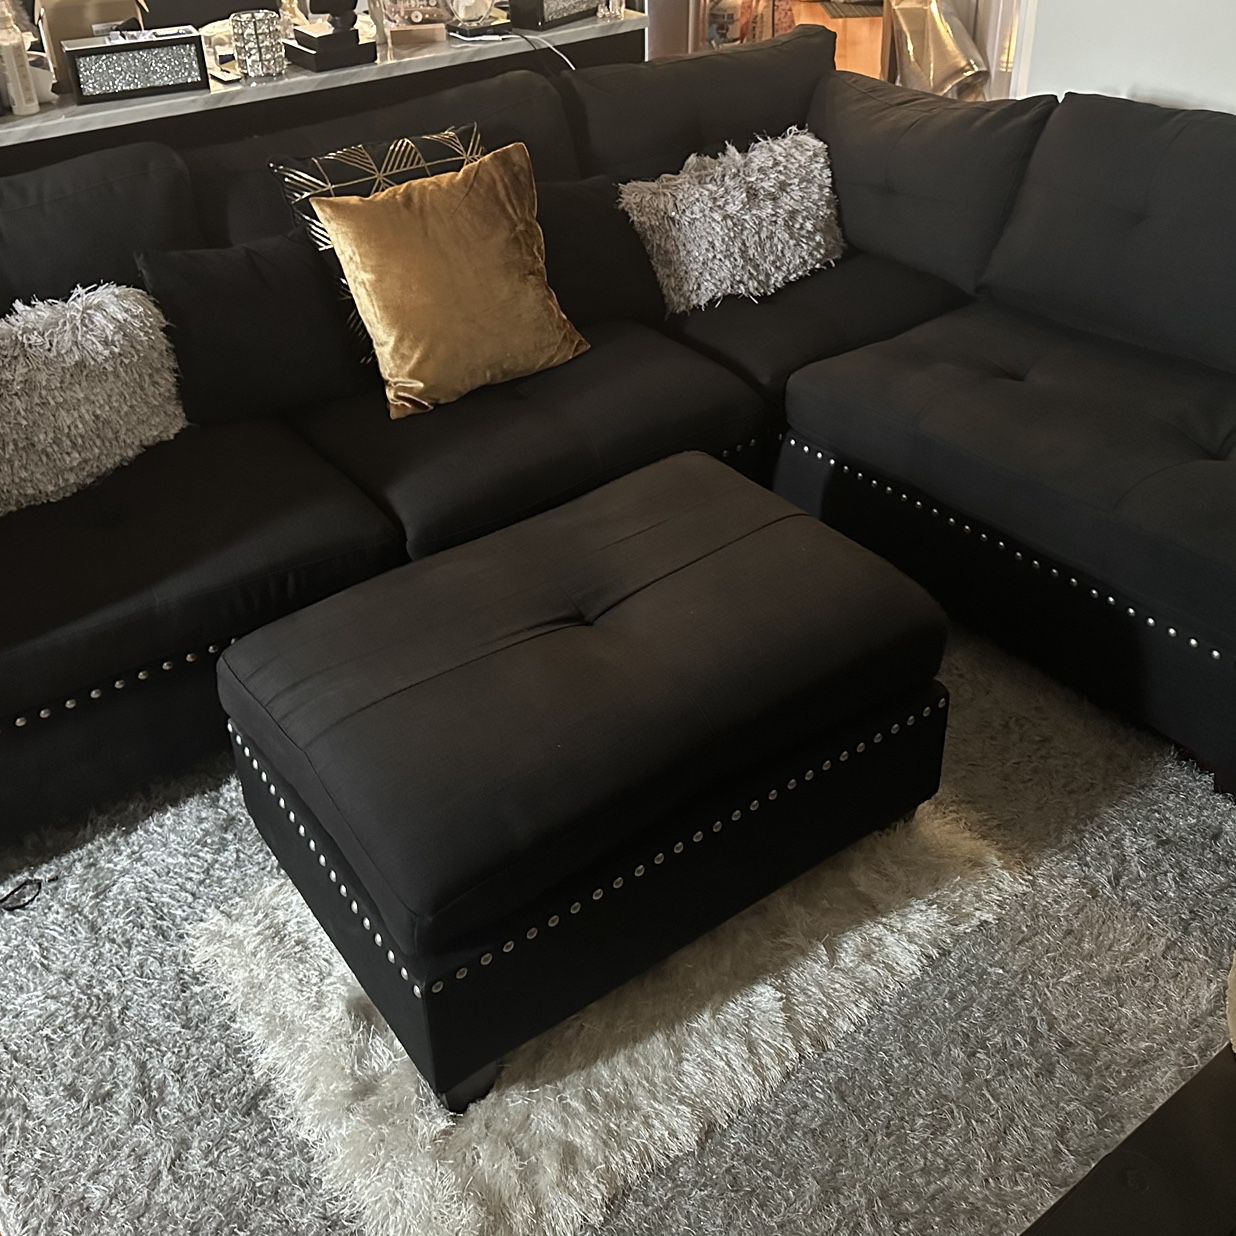 MOVING SALE all Must Go. Milani 3 - Piece Upholstered Sectional Couch and ottoman